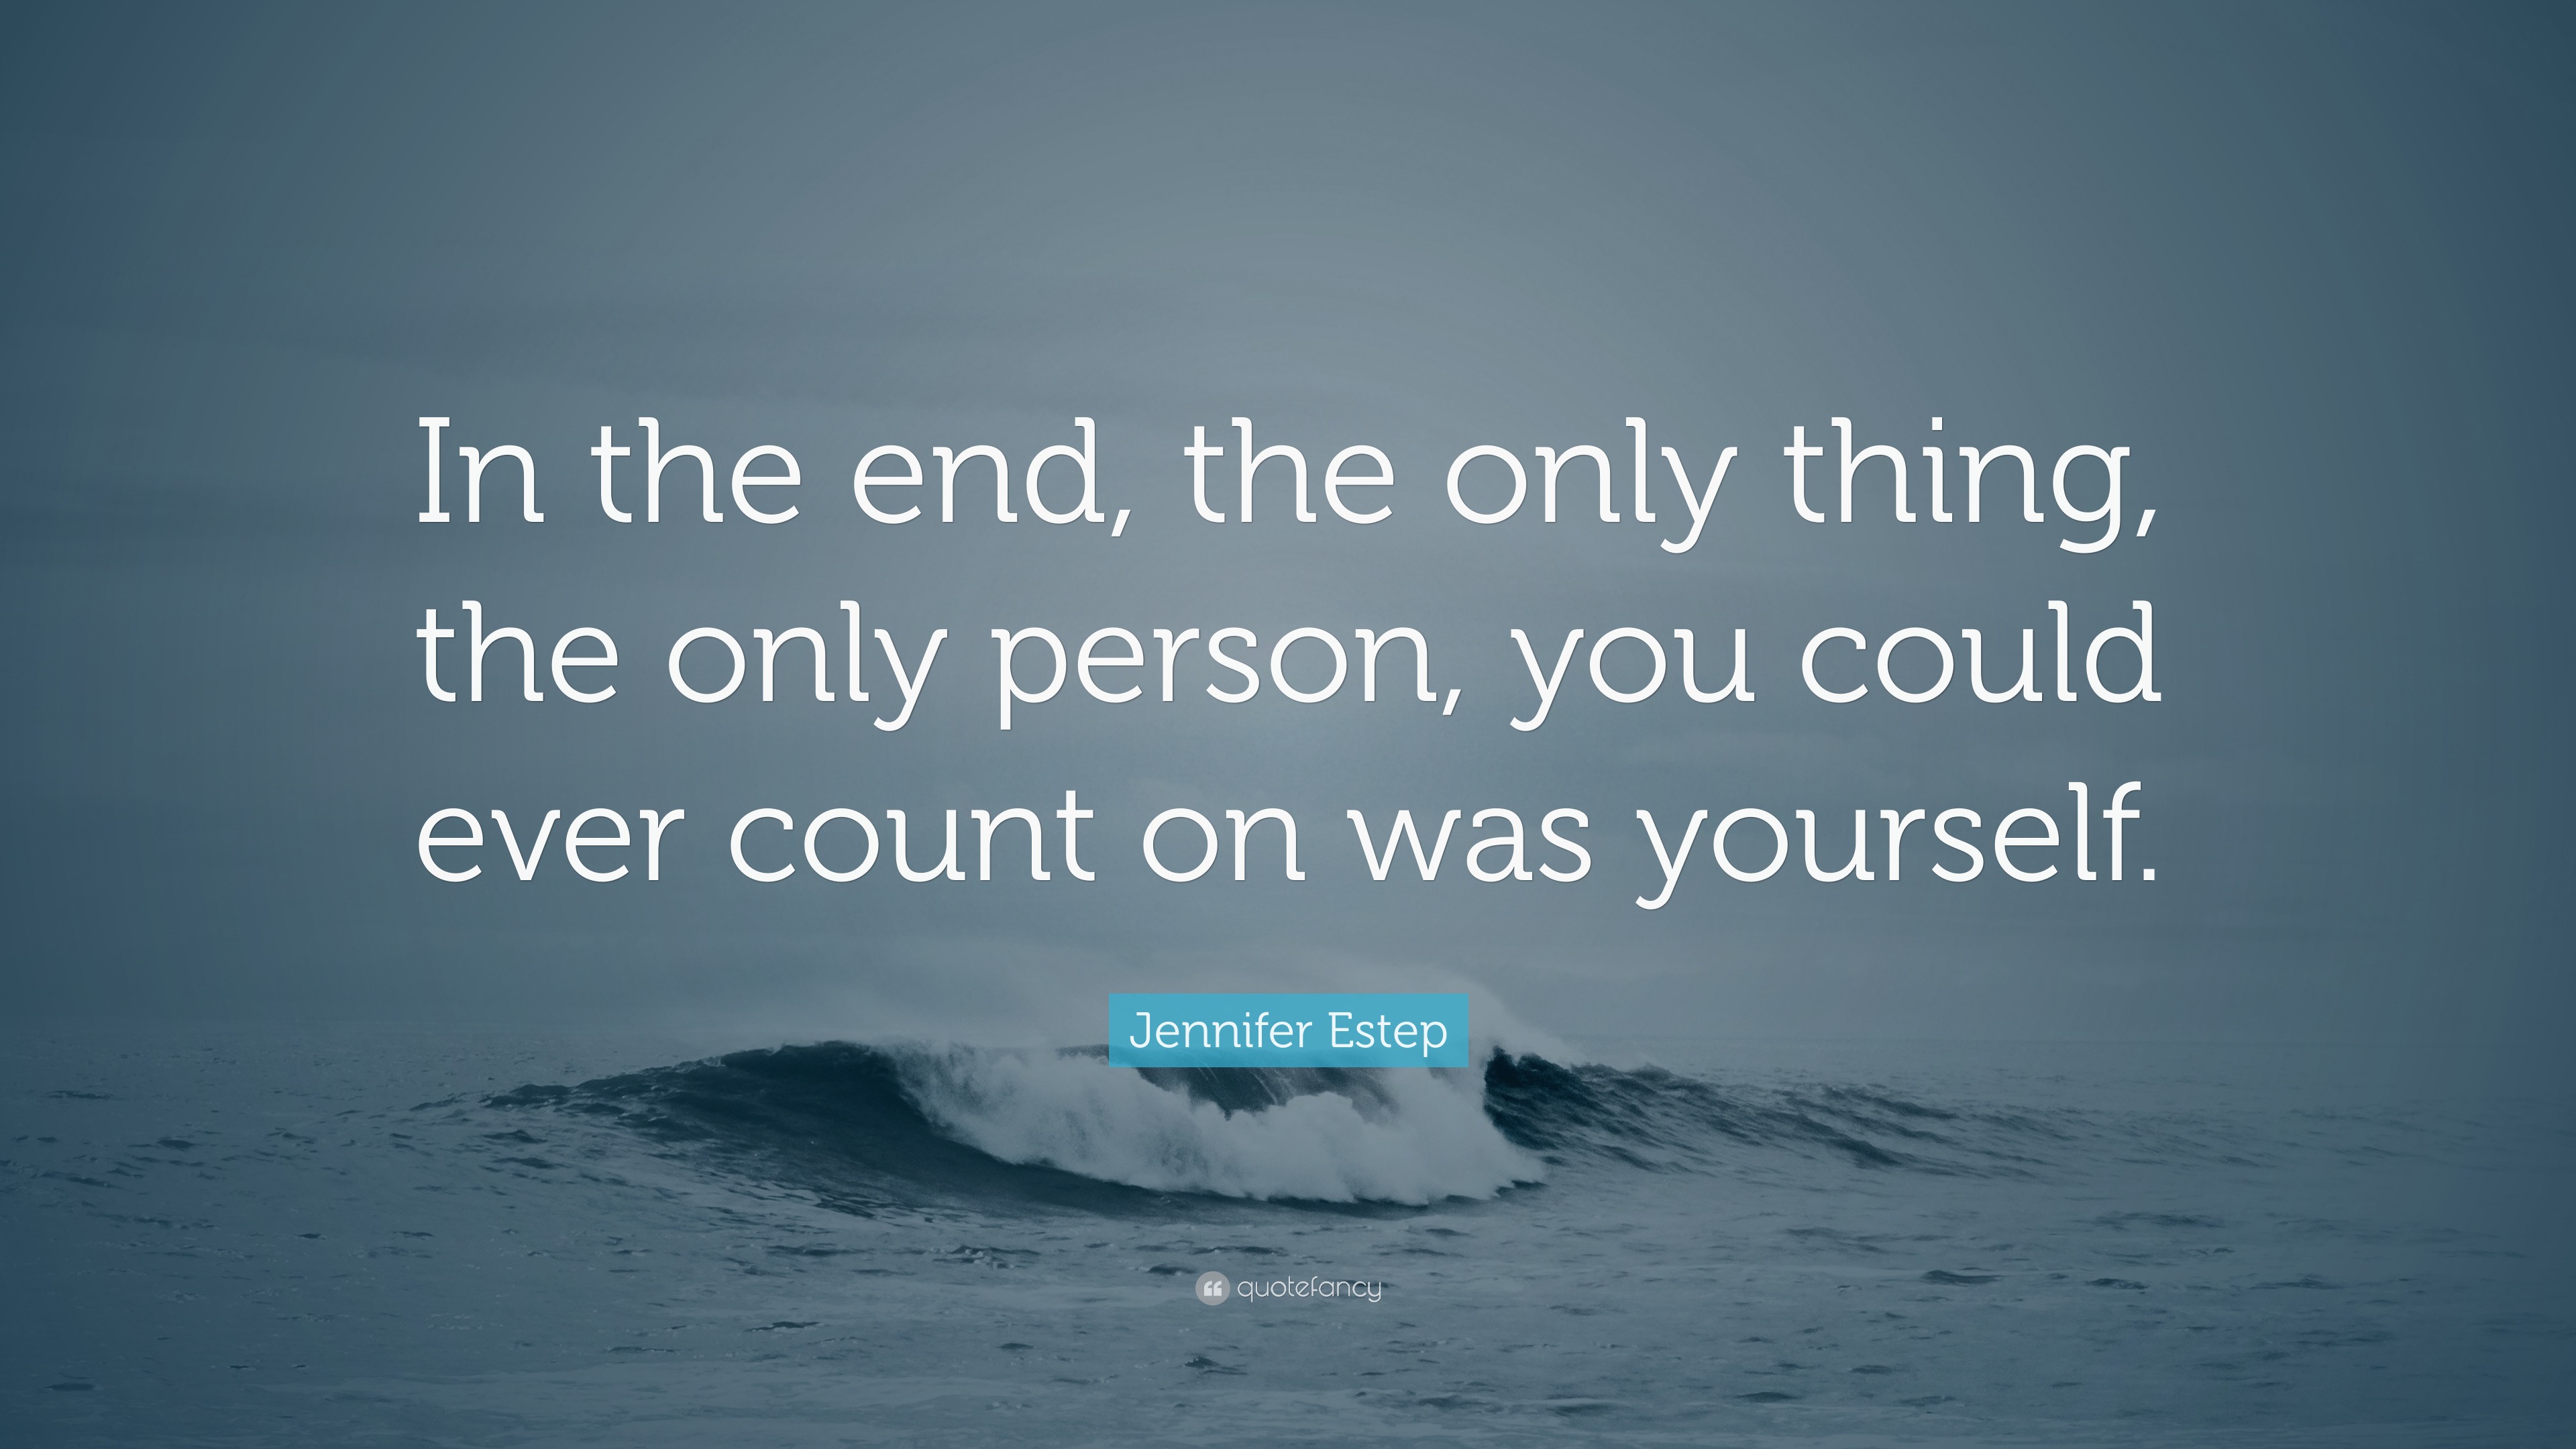 Jennifer Estep Quote: “In the end, the only thing, the only person, you ...